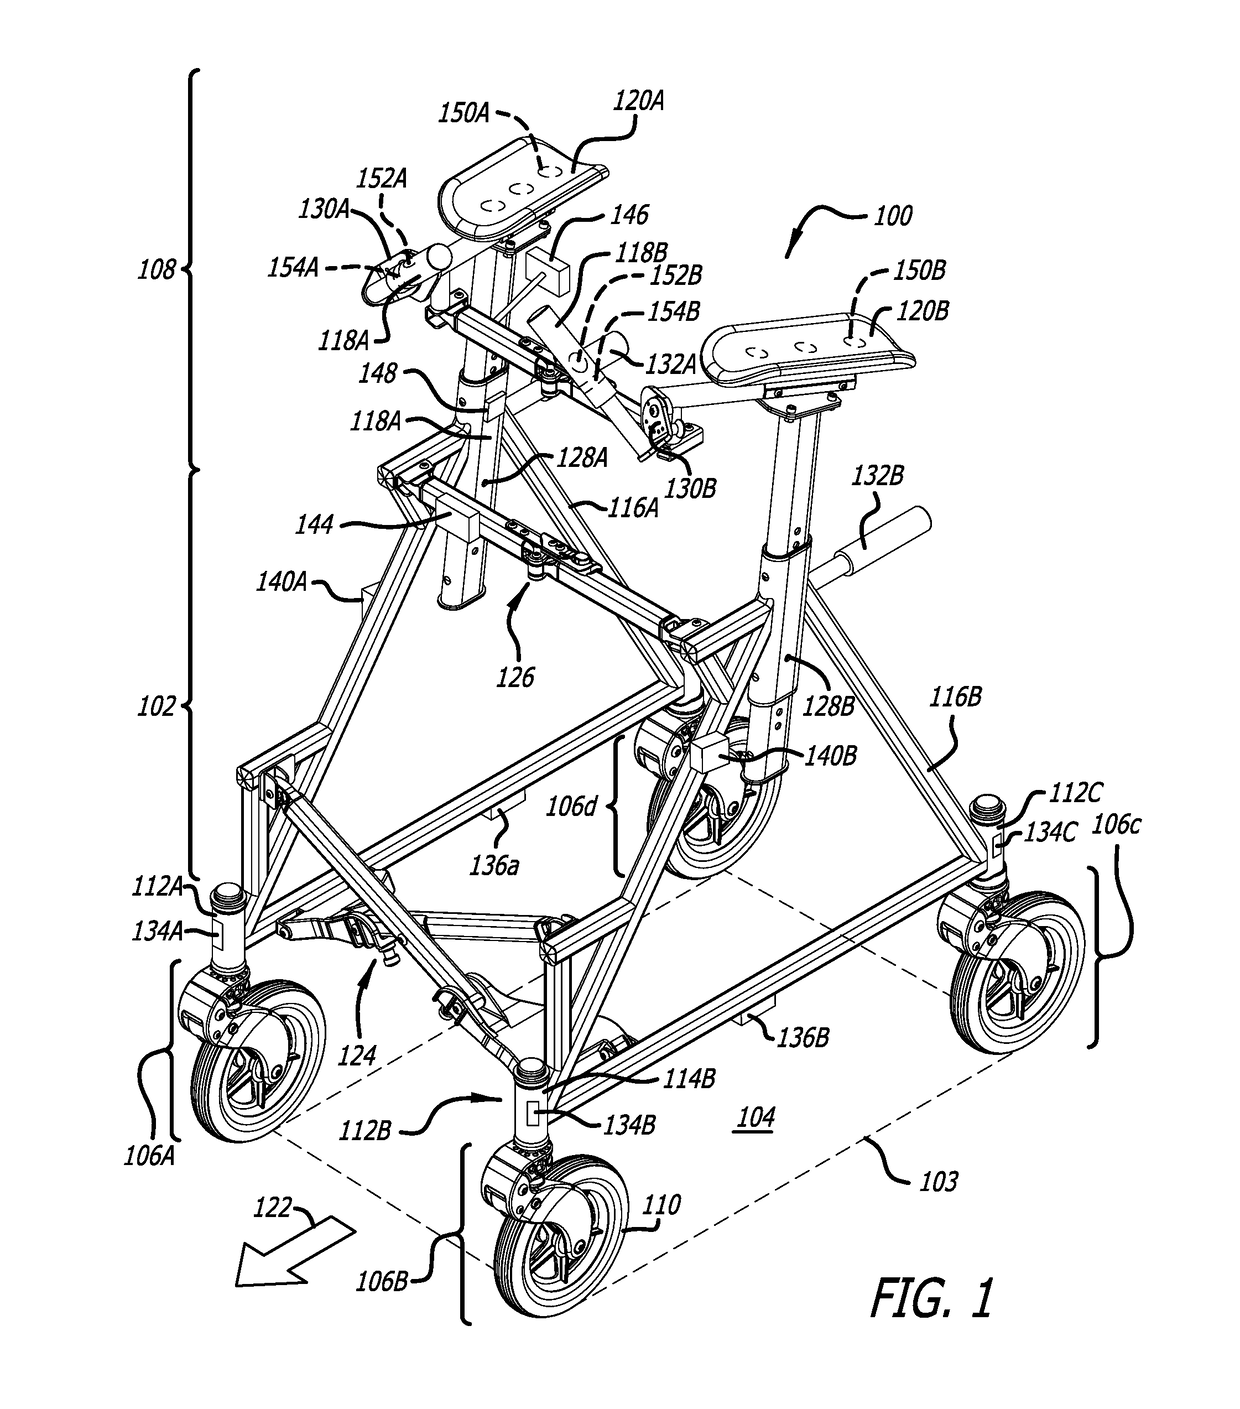 Upright walker having a user safety system employing haptic feedback